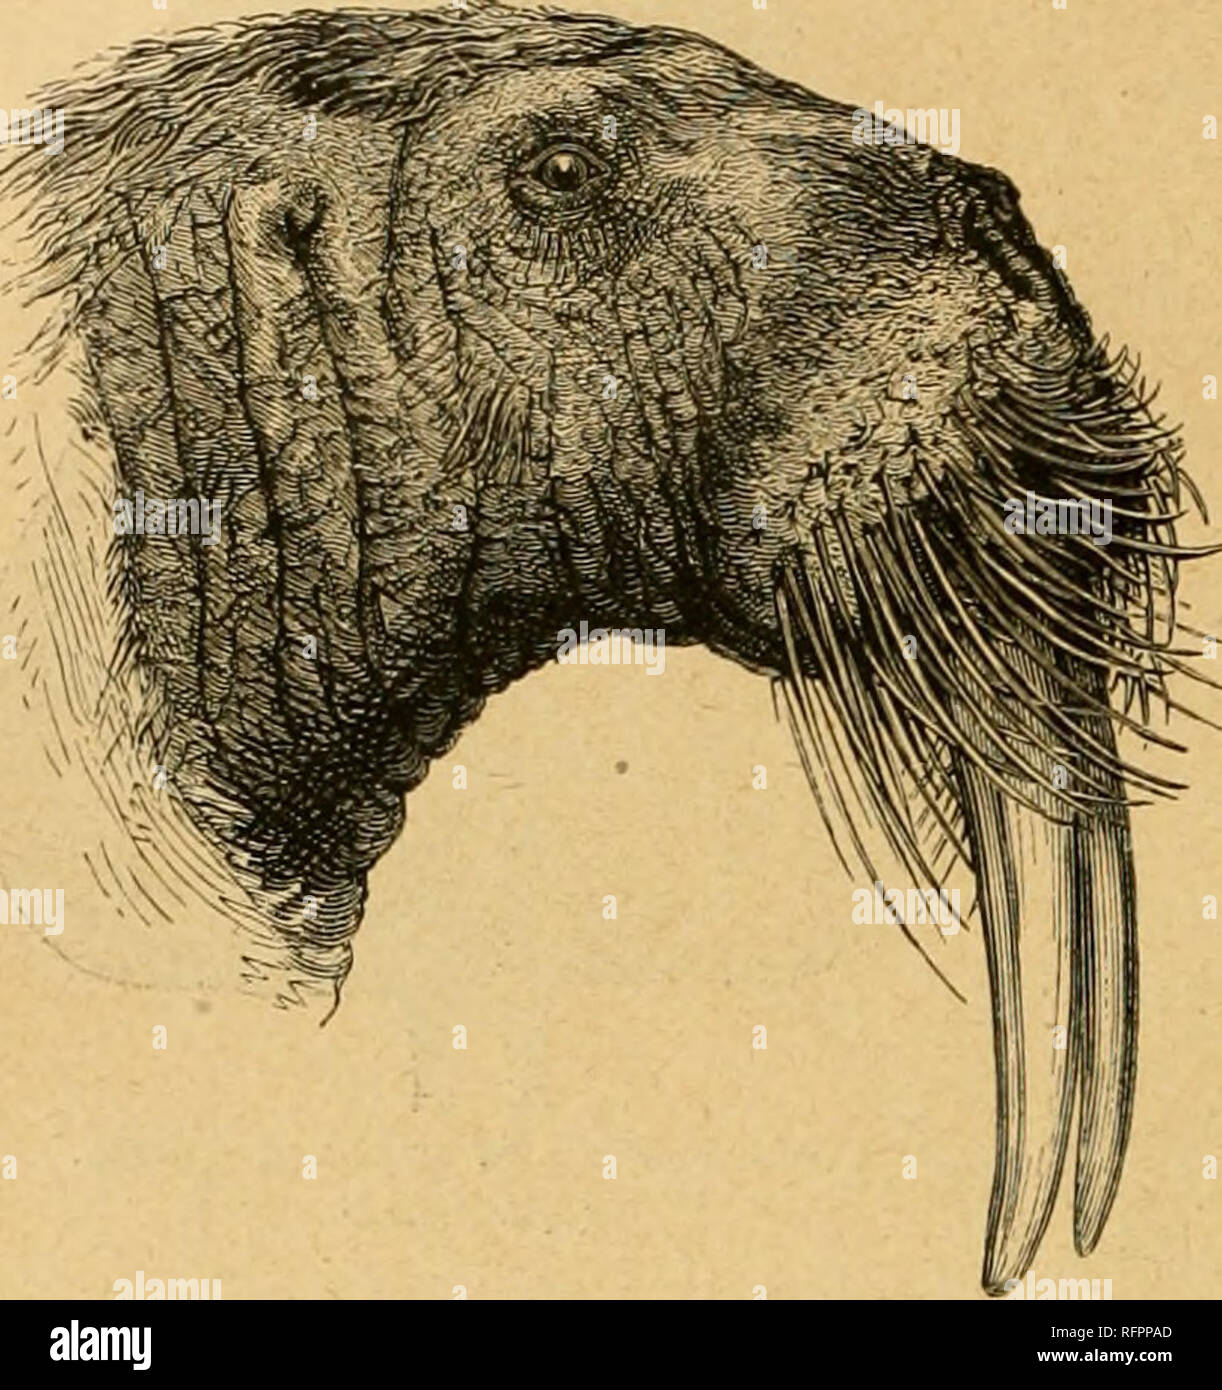 Cassell's natural history. Animals; Animal behavior. NATURAL HISTORY..   WALRUS FAMILY (TRICHECHIDiE). This family in some points resembles  the Eai-ecl Seals, or Otaries, and in others approaches the Earless Seals,  or